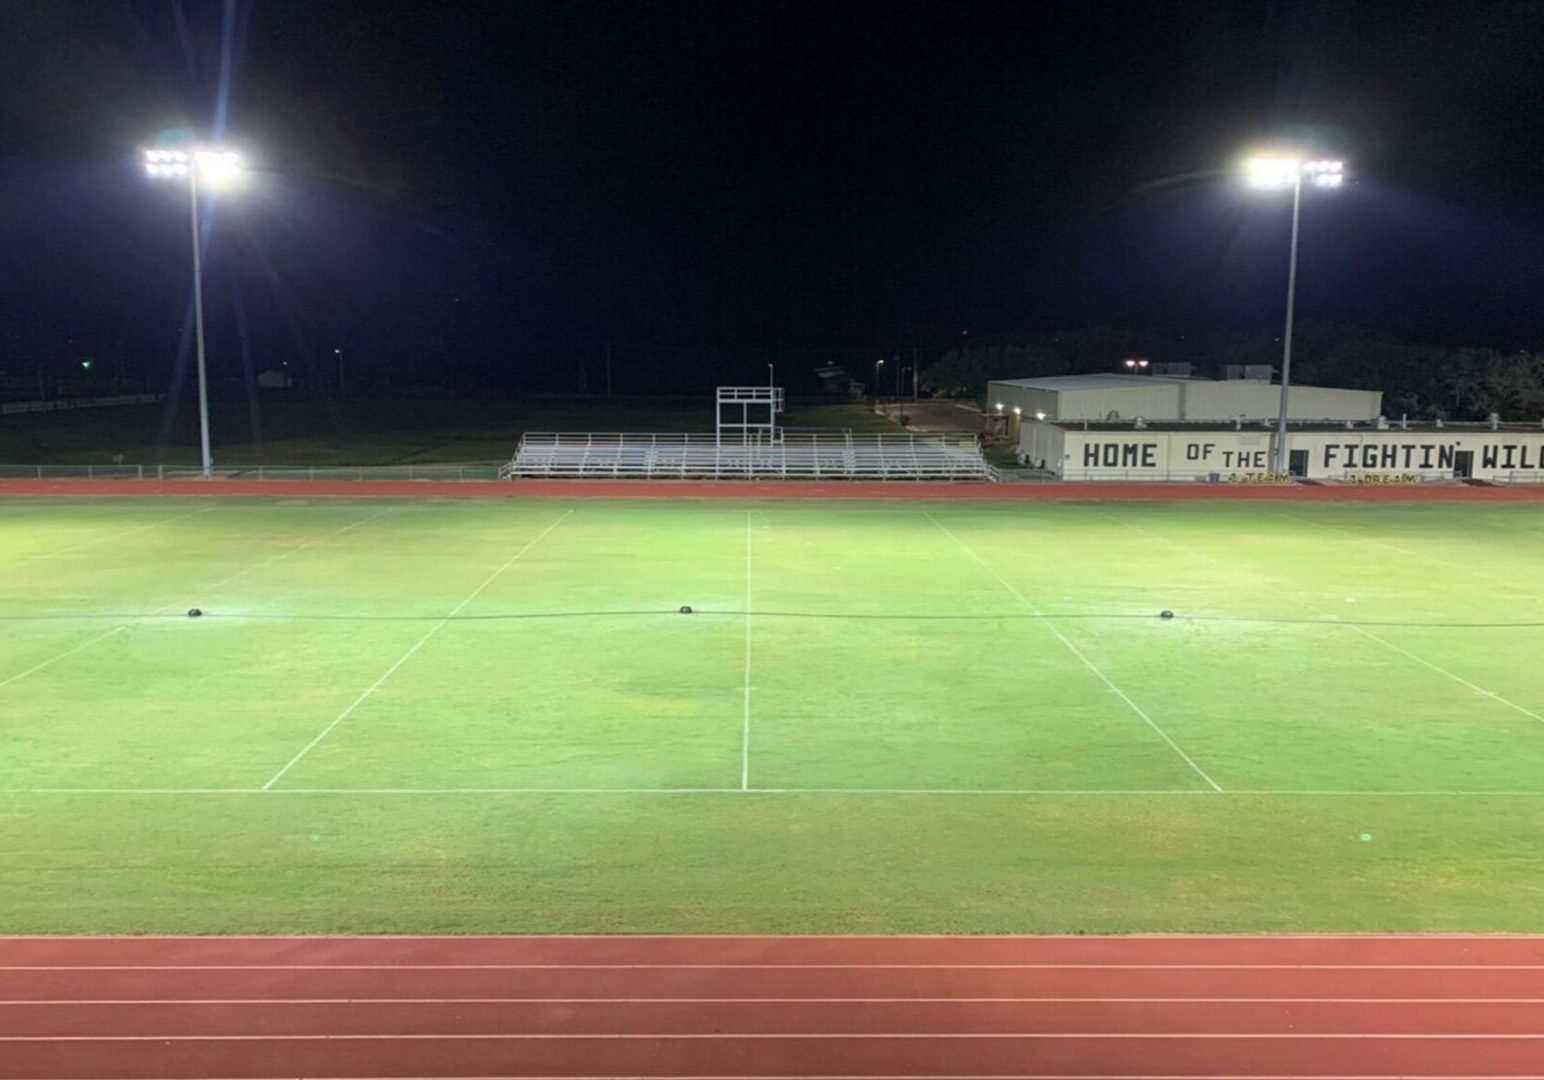 A field with lights on at night time.